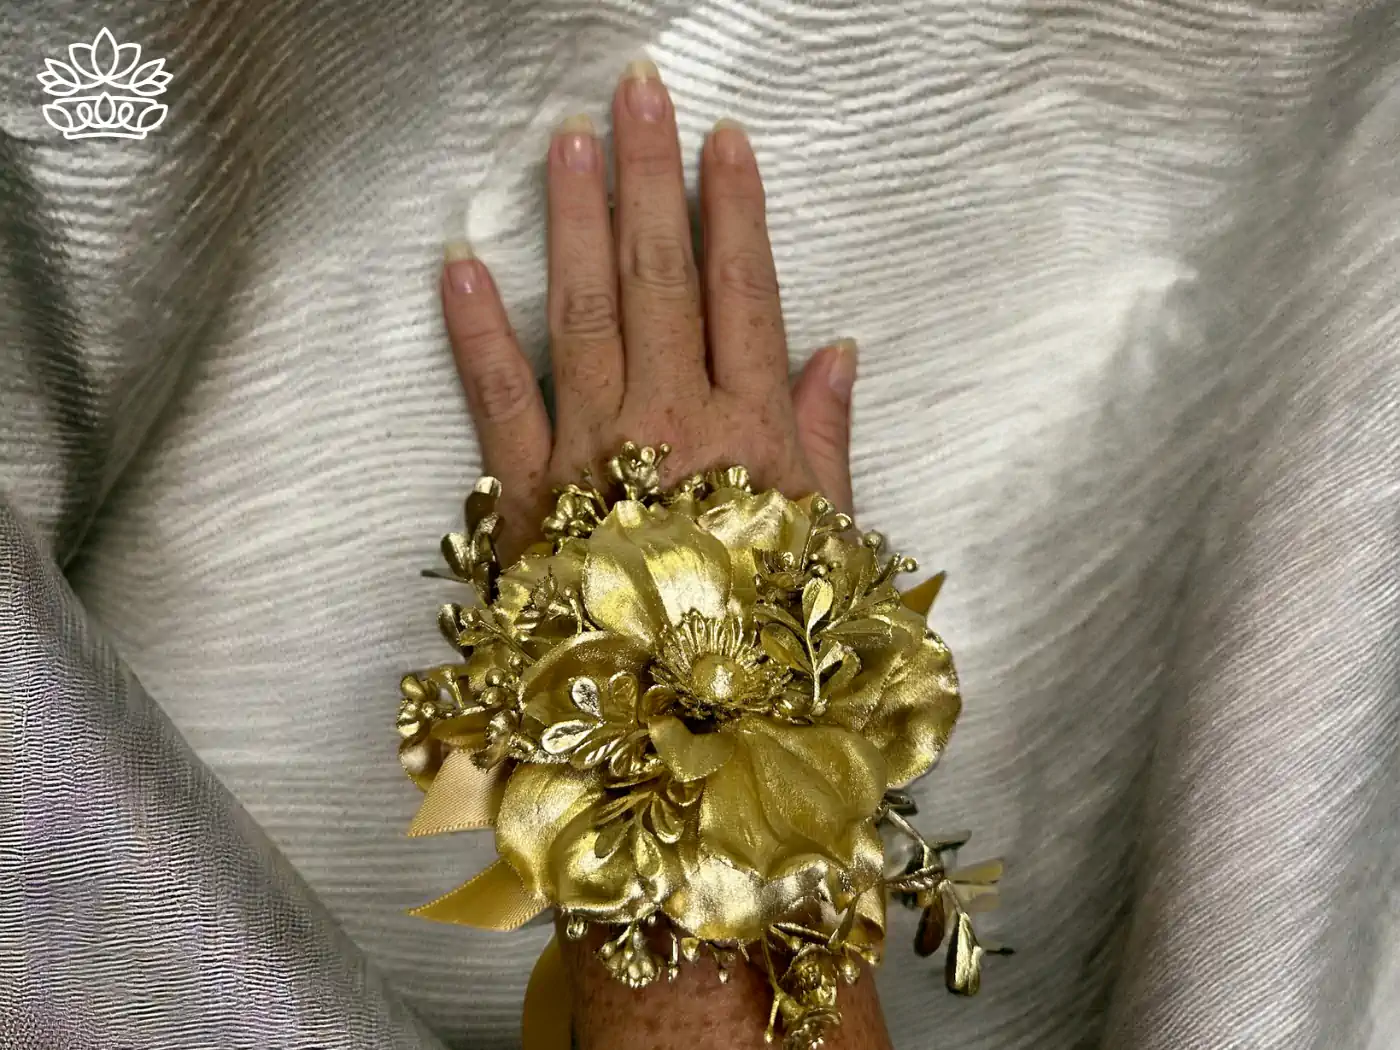 A hand elegantly displays a golden floral corsage, adorned with metallic gold flowers and leaves, accentuated by a shimmering ribbon, against a textured silver fabric backdrop. Fabulous Flowers and Gifts - Matric Dance. Delivered with Heart.